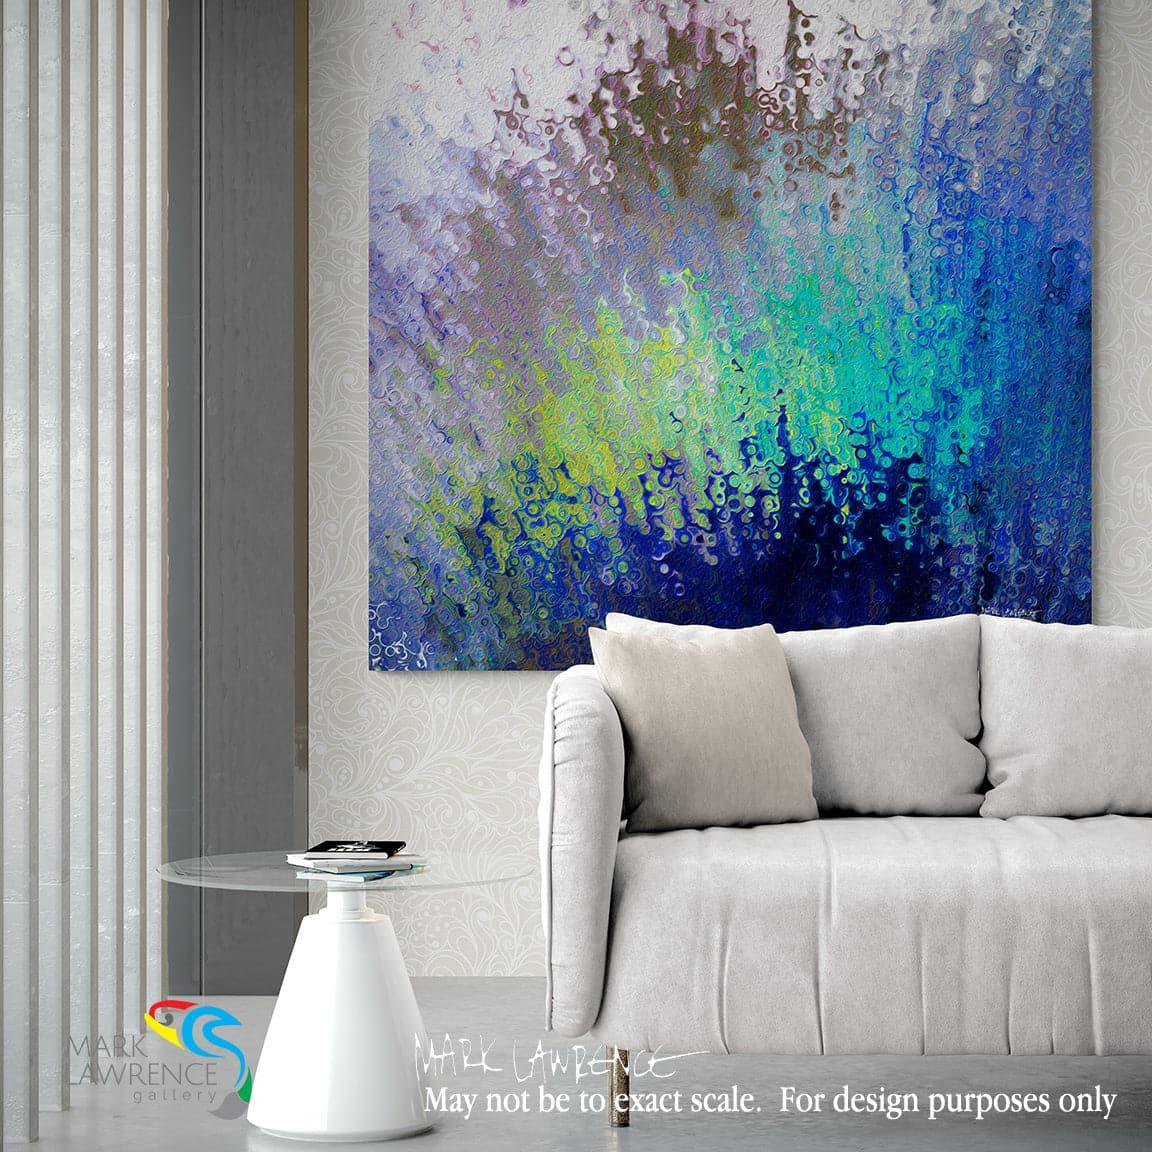 Interior Design Inspiration- Psalm 62:5. Waiting For Jesus. Limited Edition Christian Modern Art. Ultra-hand embellished and textured with rich brush strokes by the artist. Signed & numbered brightly colored Christian abstract art. Find Art That Speaks To You! For God alone, O my soul, wait in silence, for my hope is from him. Psalm 62:5